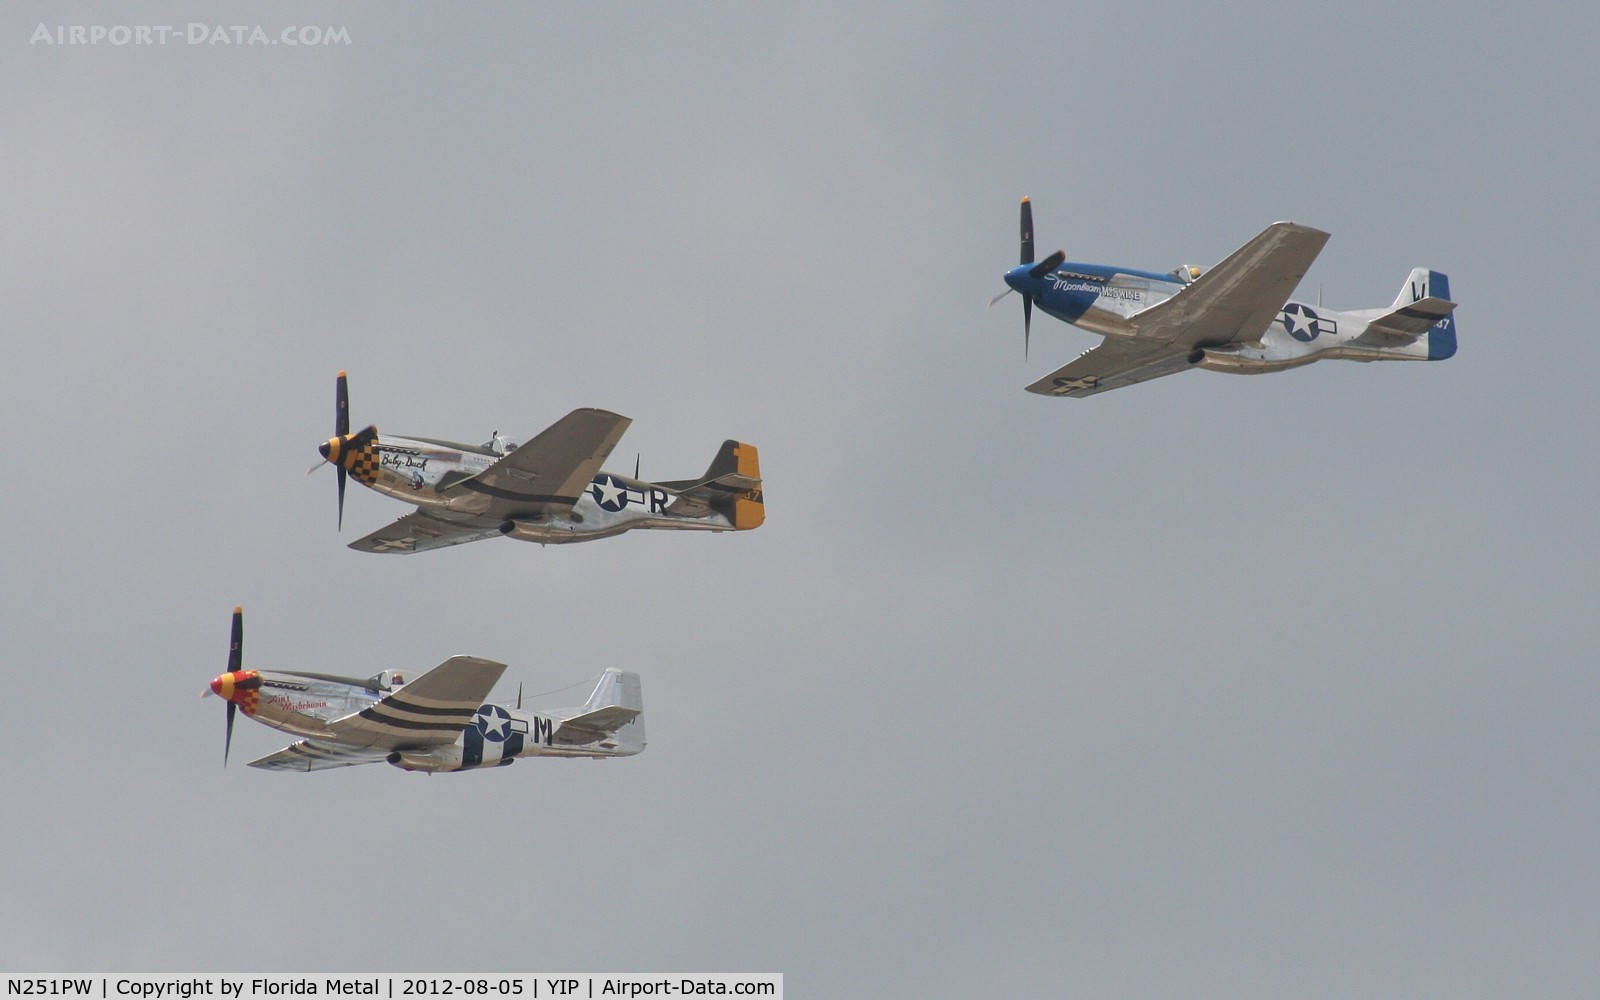 N251PW, 1944 North American P-51D Mustang C/N 122-31945, 3 ship formation